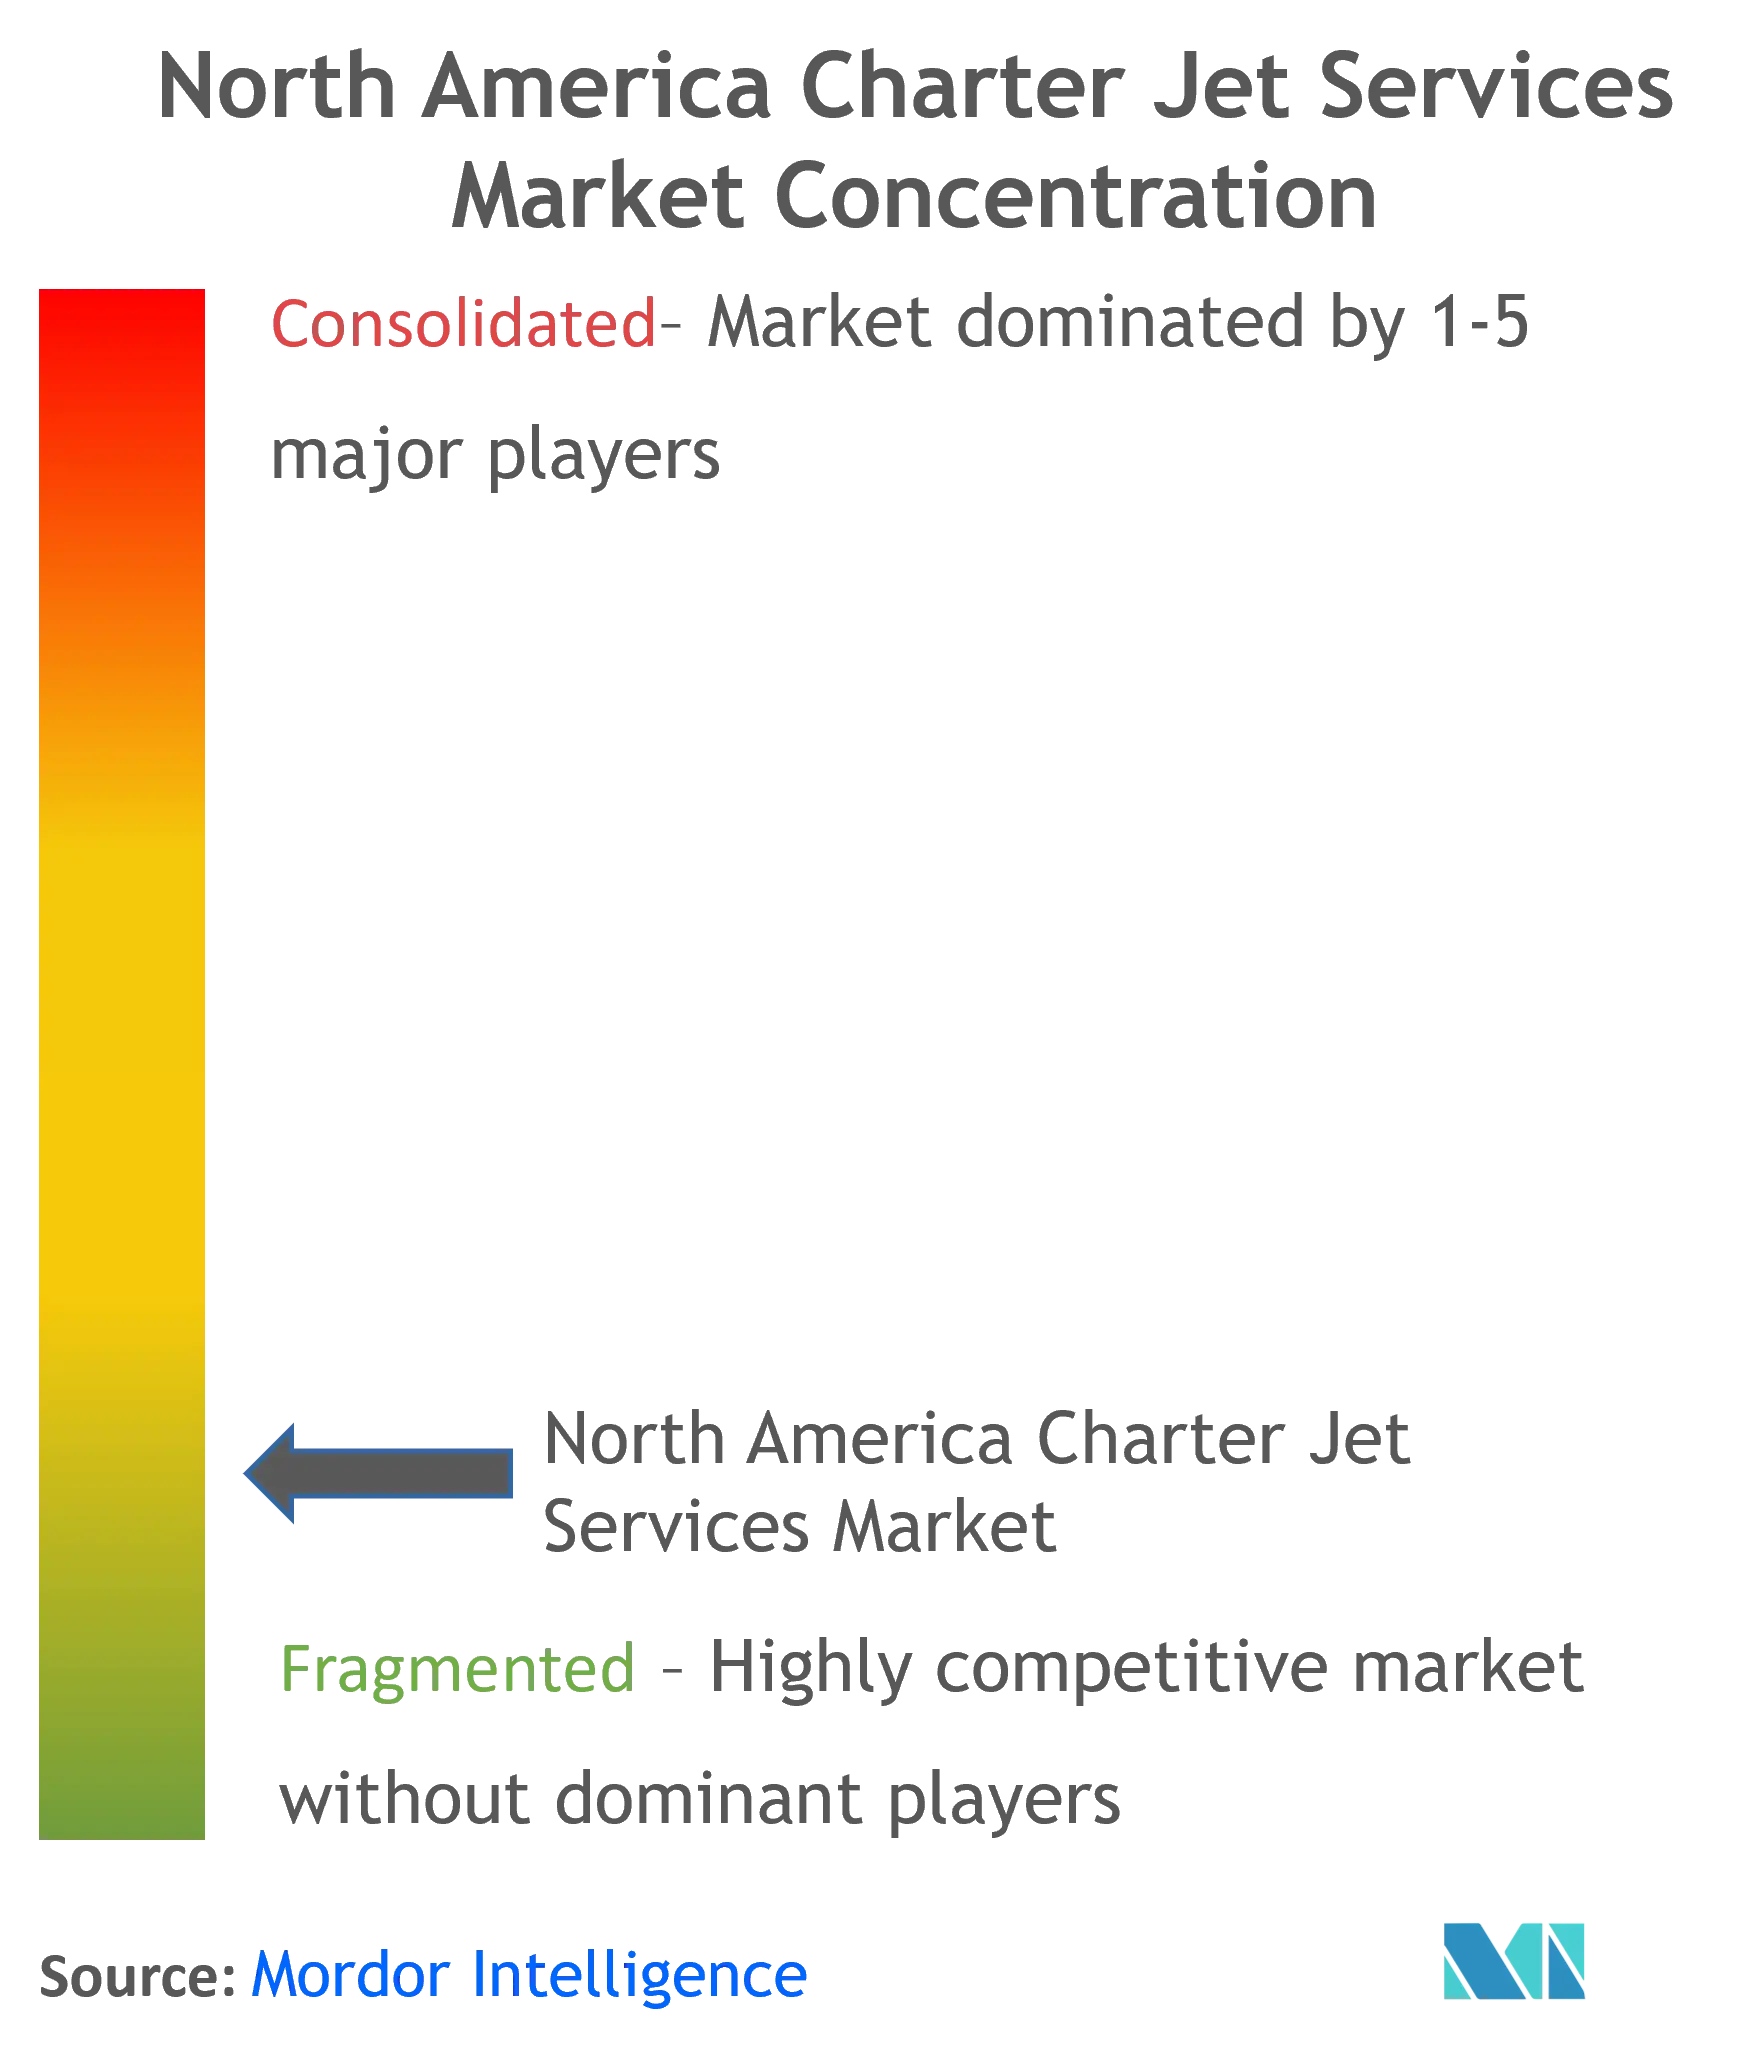 North America Charter Jet Services Market Concentration